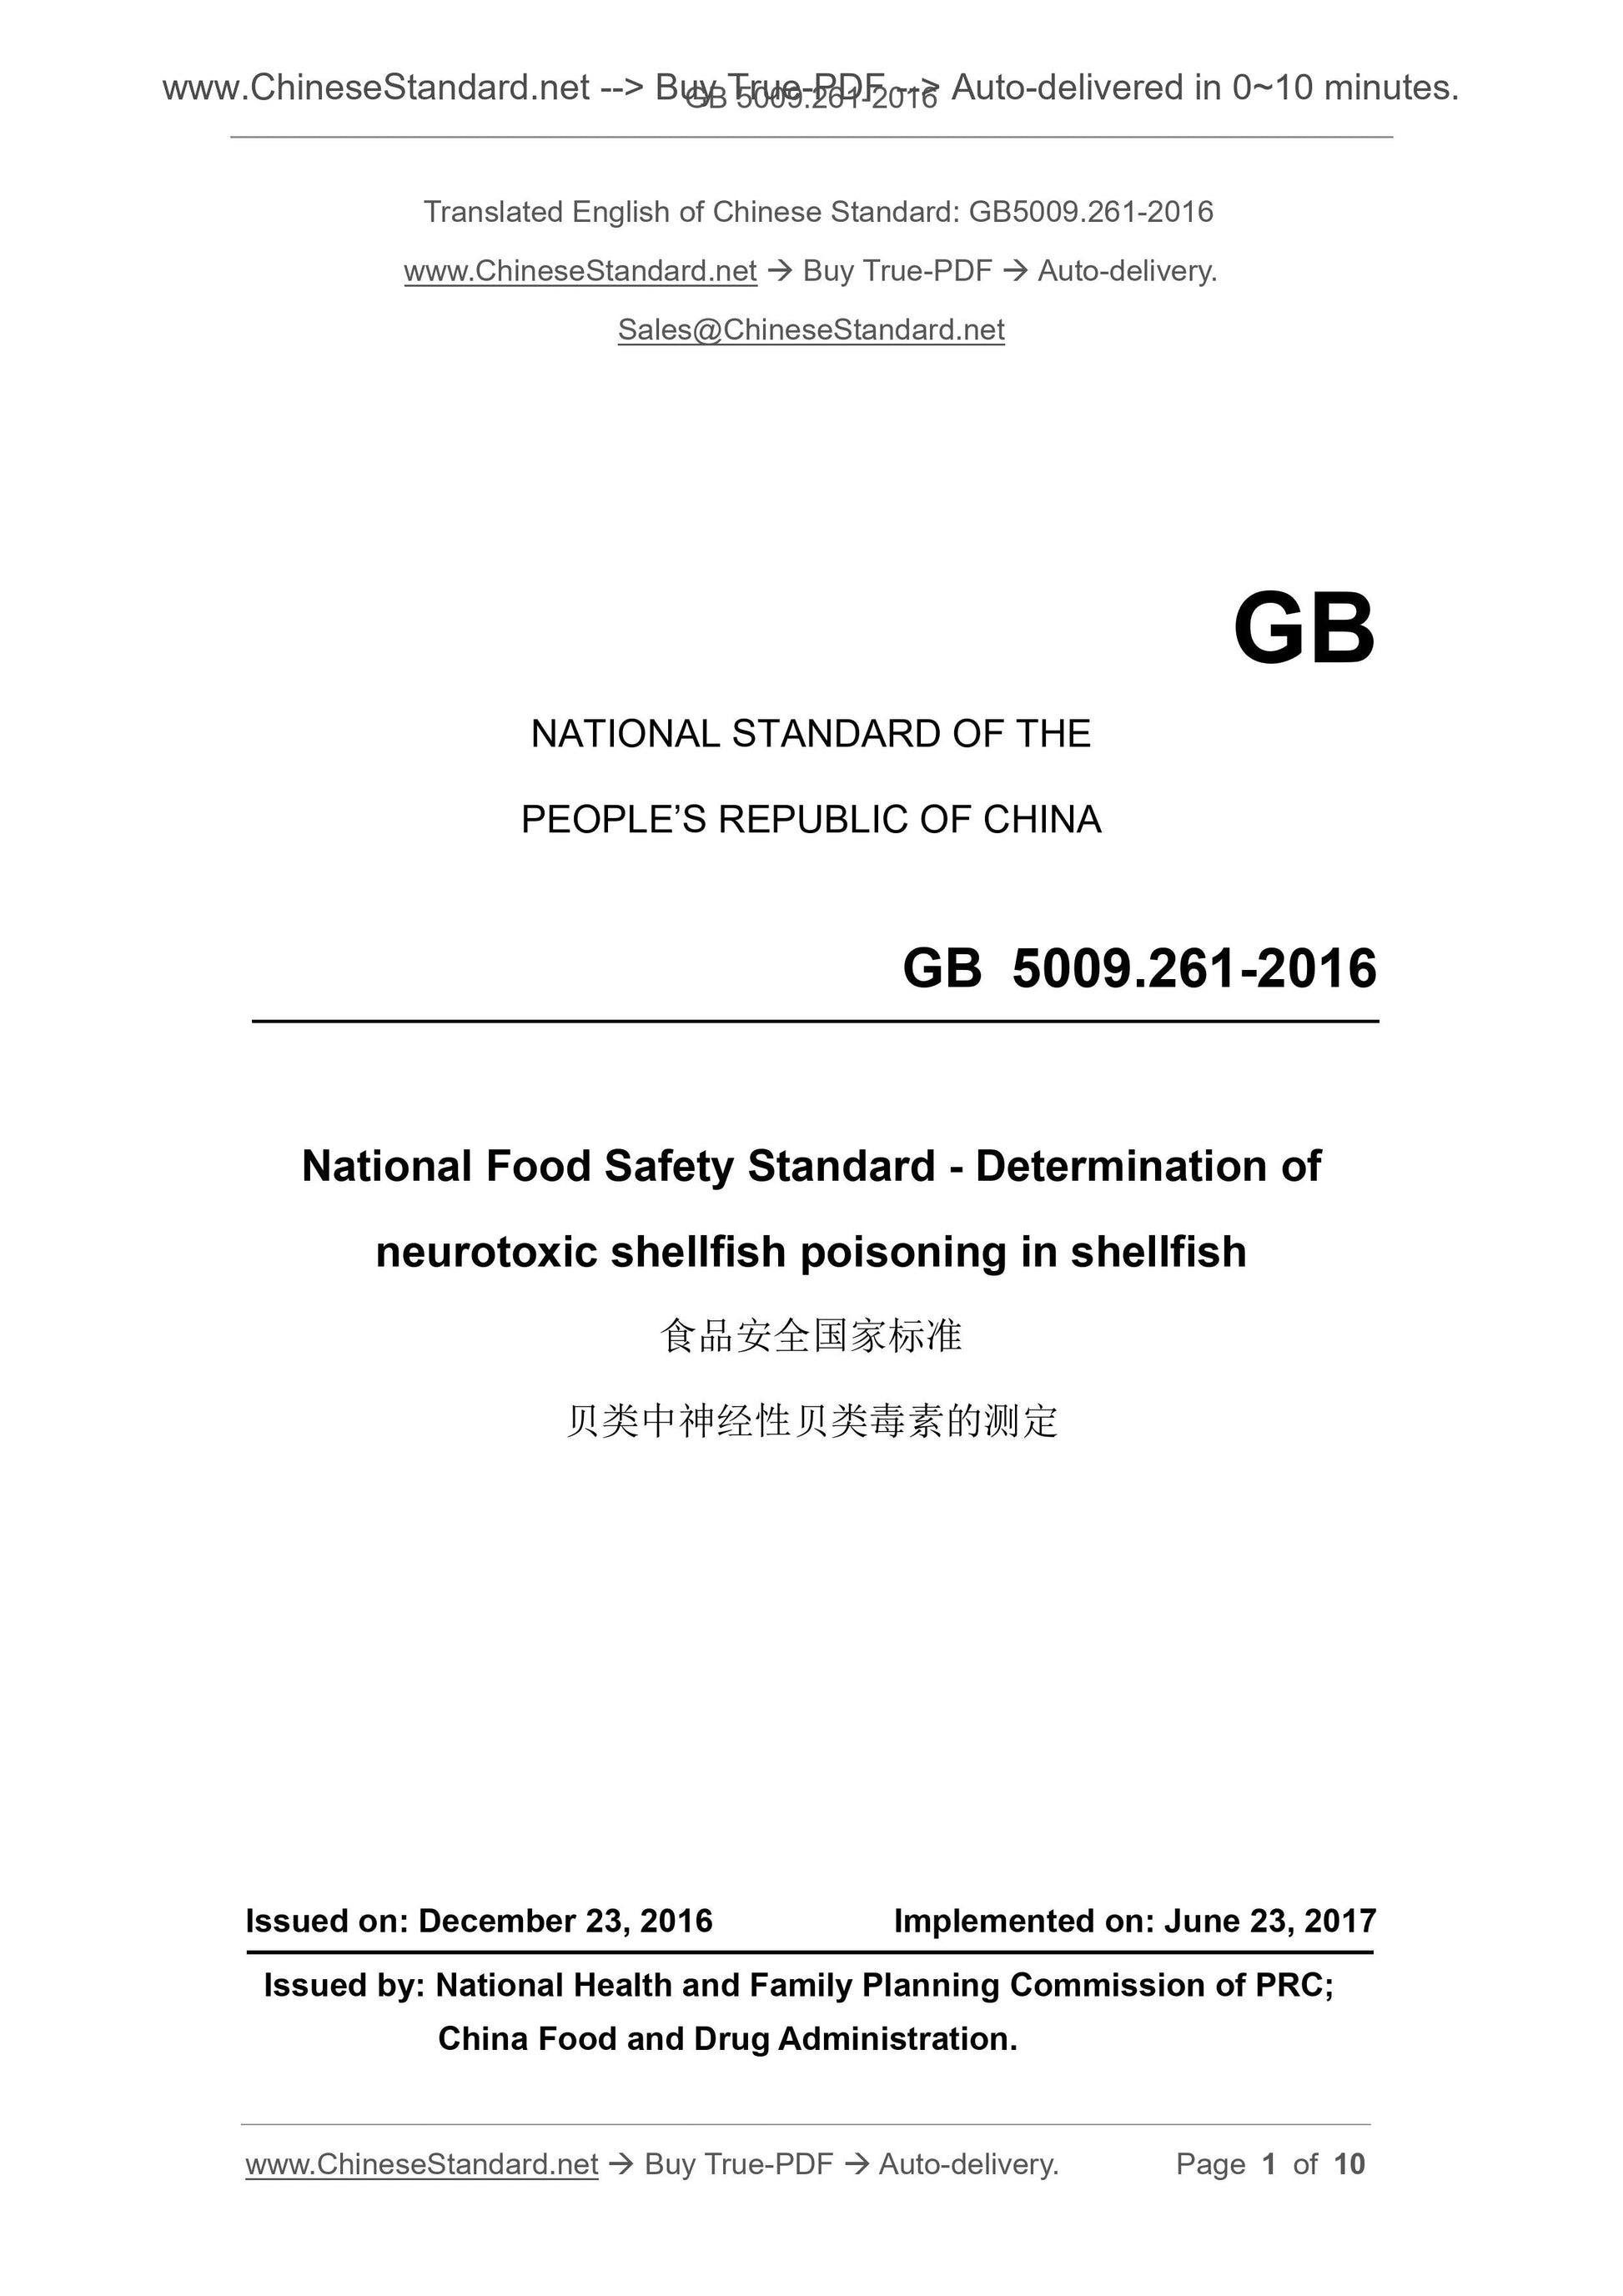 GB 5009.261-2016 Page 1